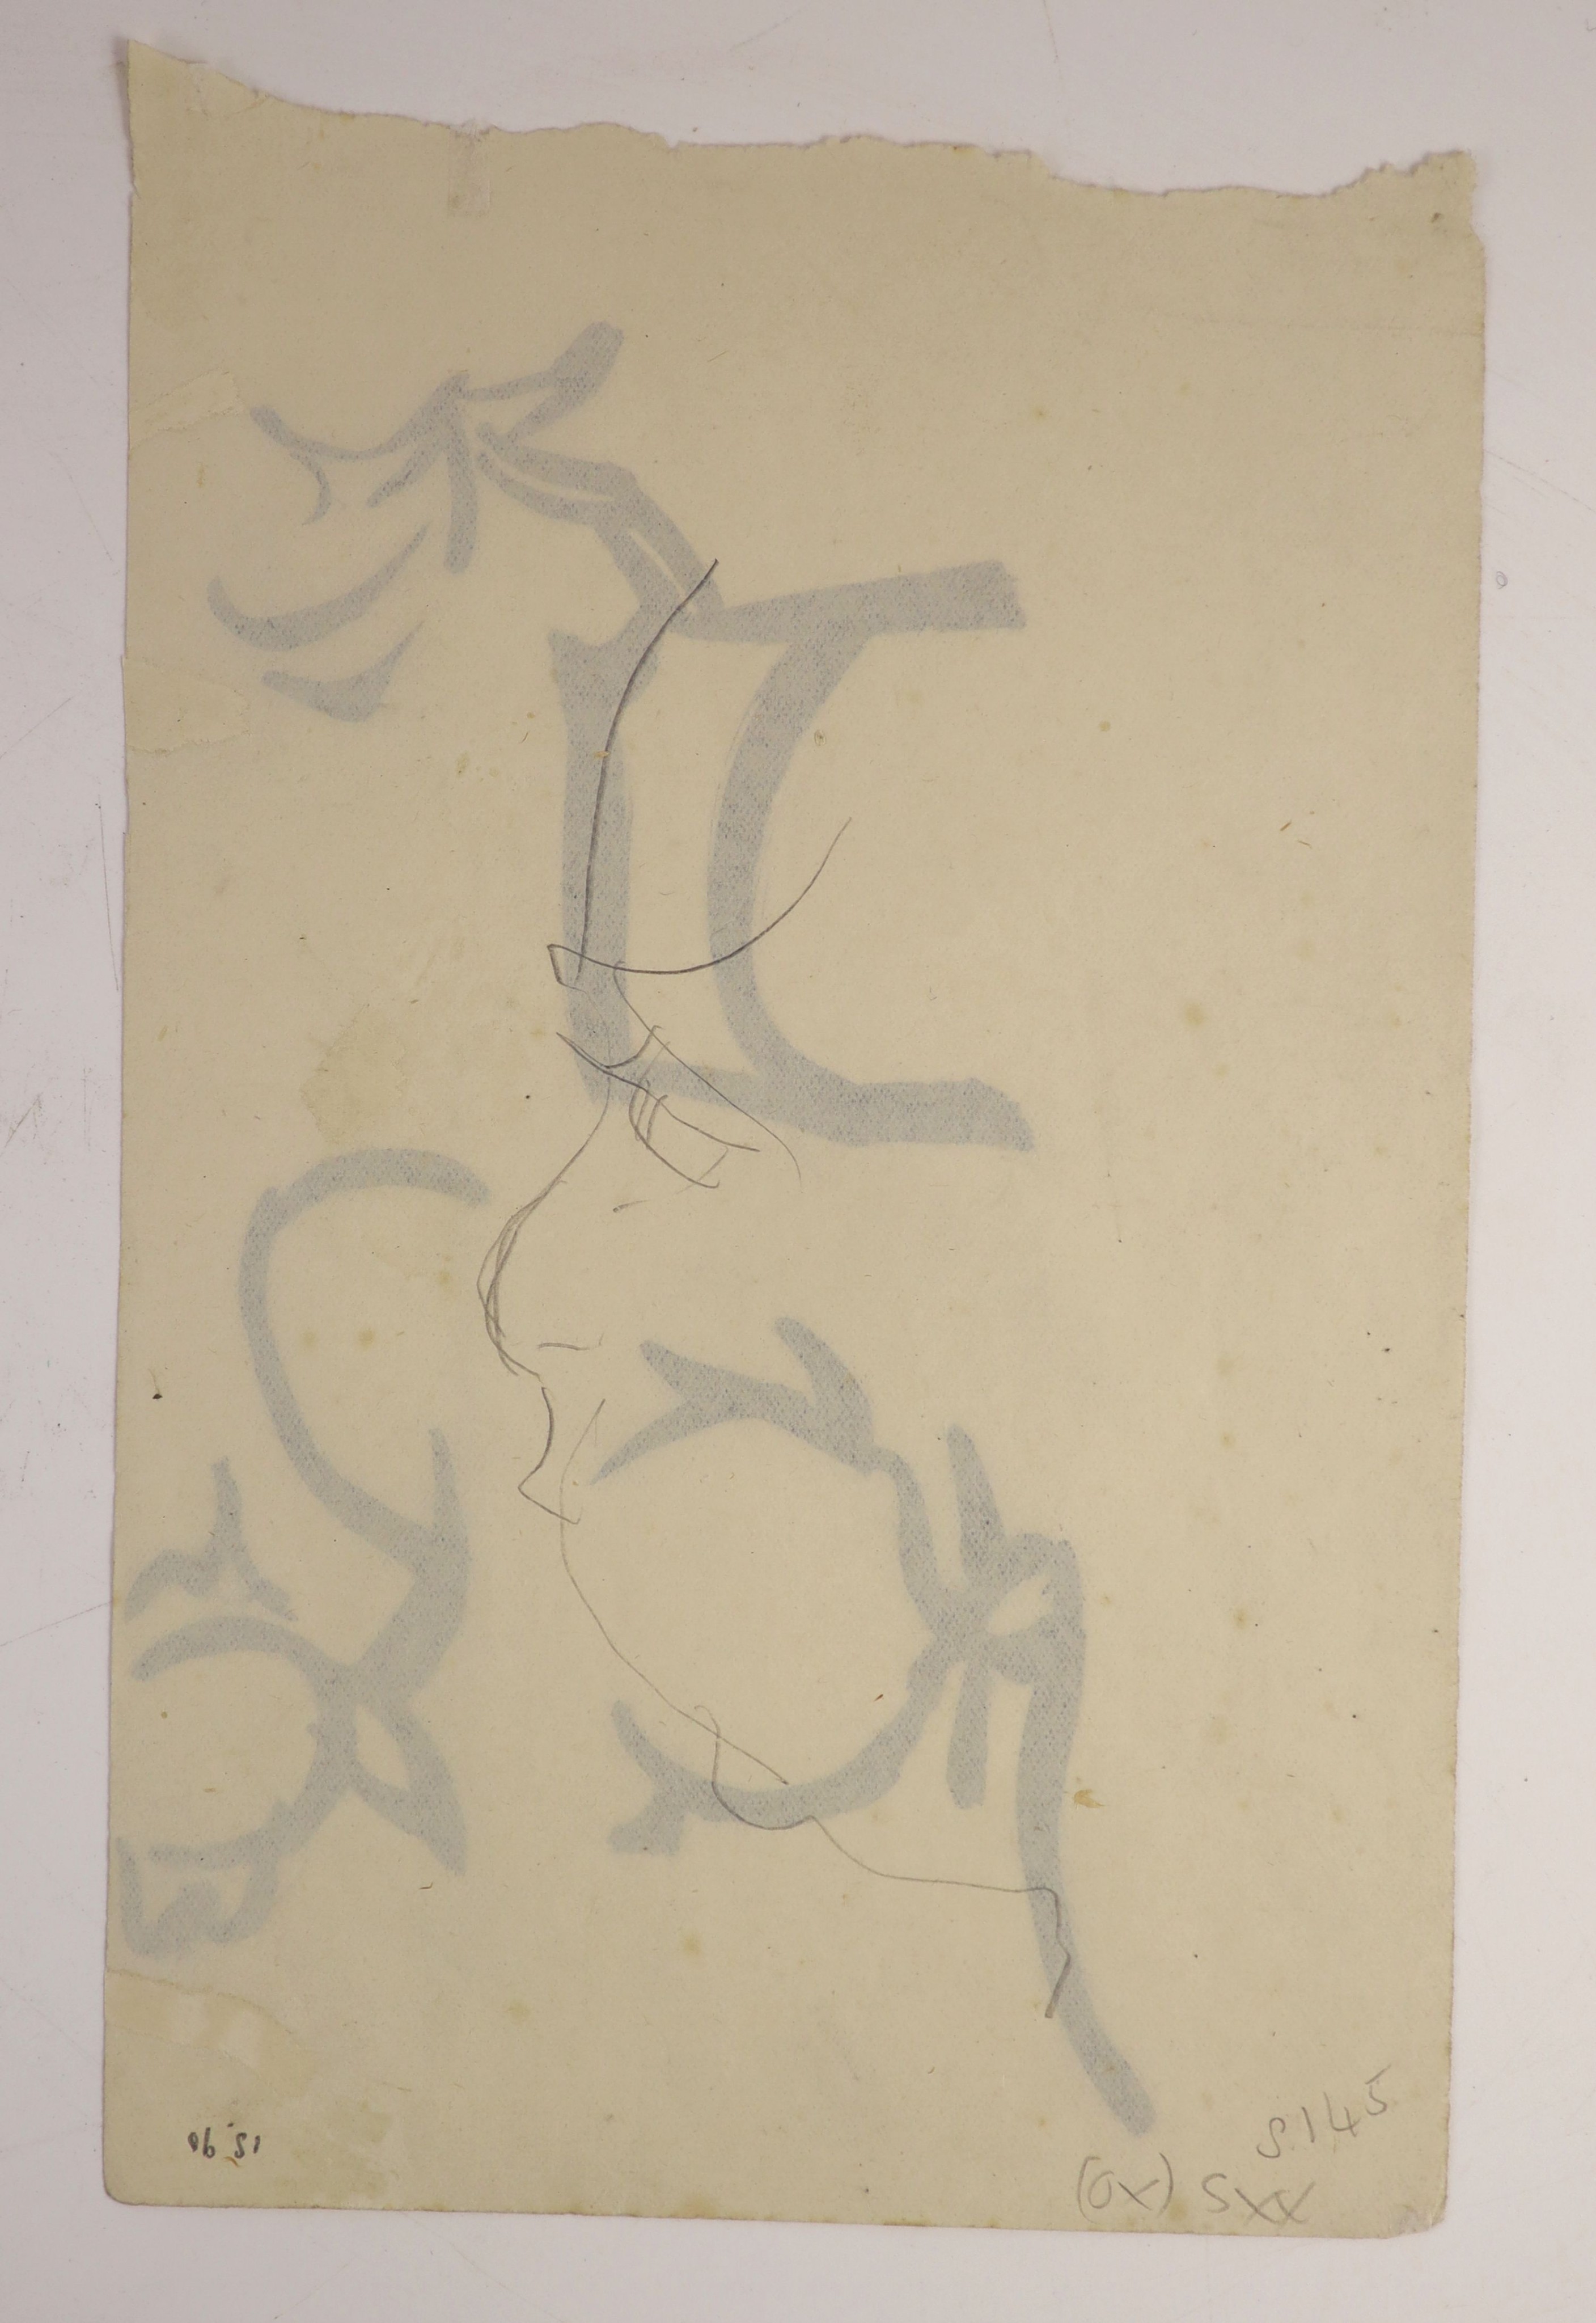 Henri Gaudier-Brzeska (1891-1915), Abstract drawing of a stag and antlers, black ink on paper, and an unfinished pencil sketch of a child’s head to verso, on paper, 14 x 20cm, unframed